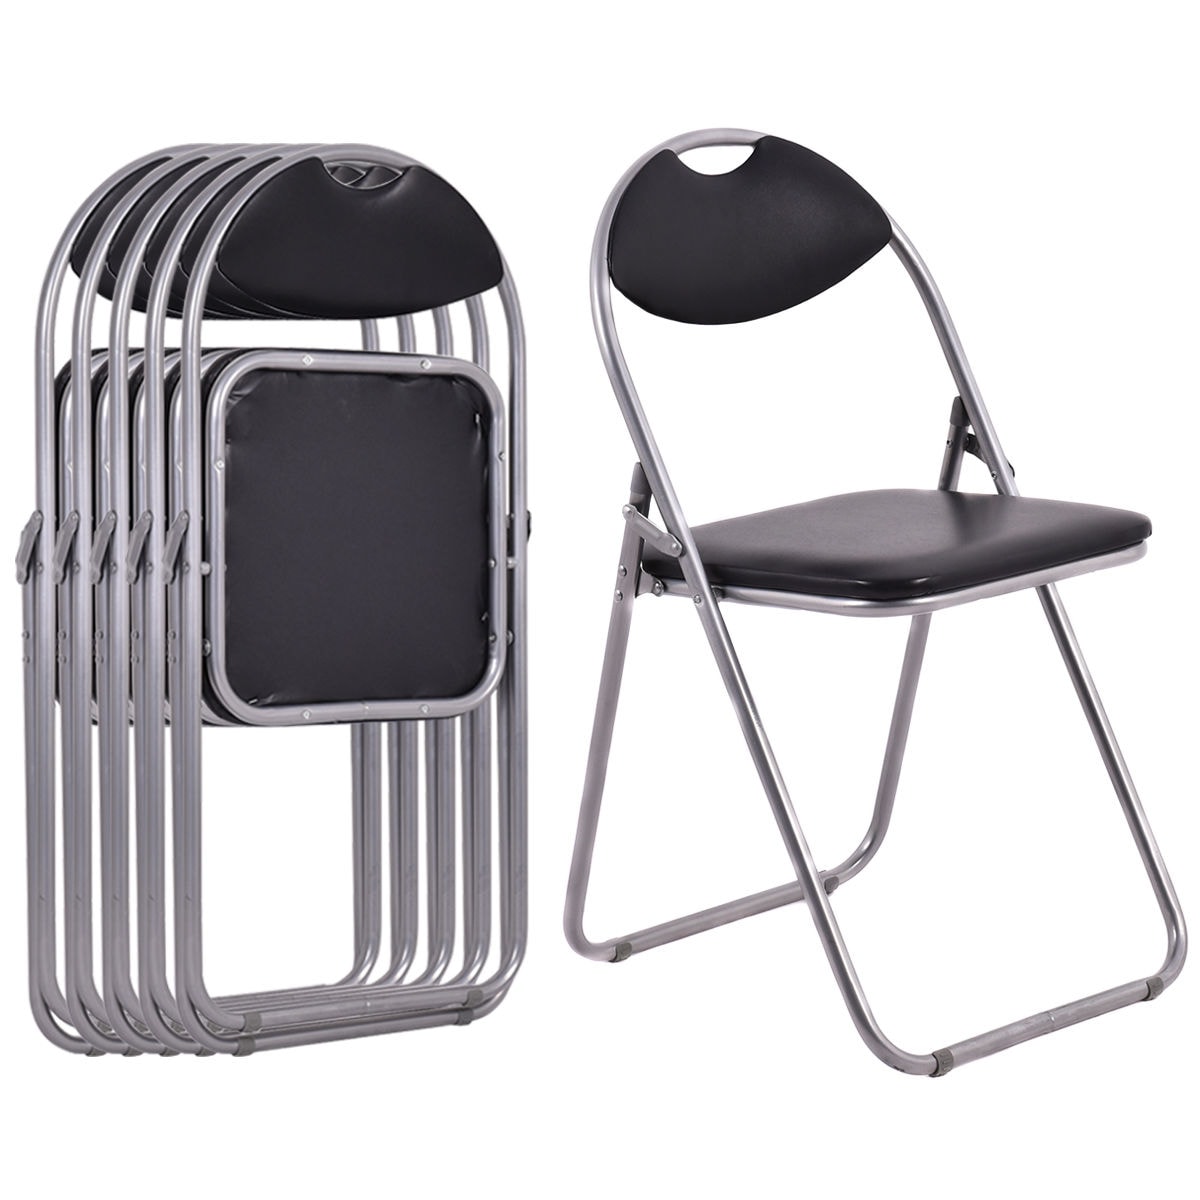 CLS Stainless Steel Spring Folding Chair Outdoor Fishing Chair